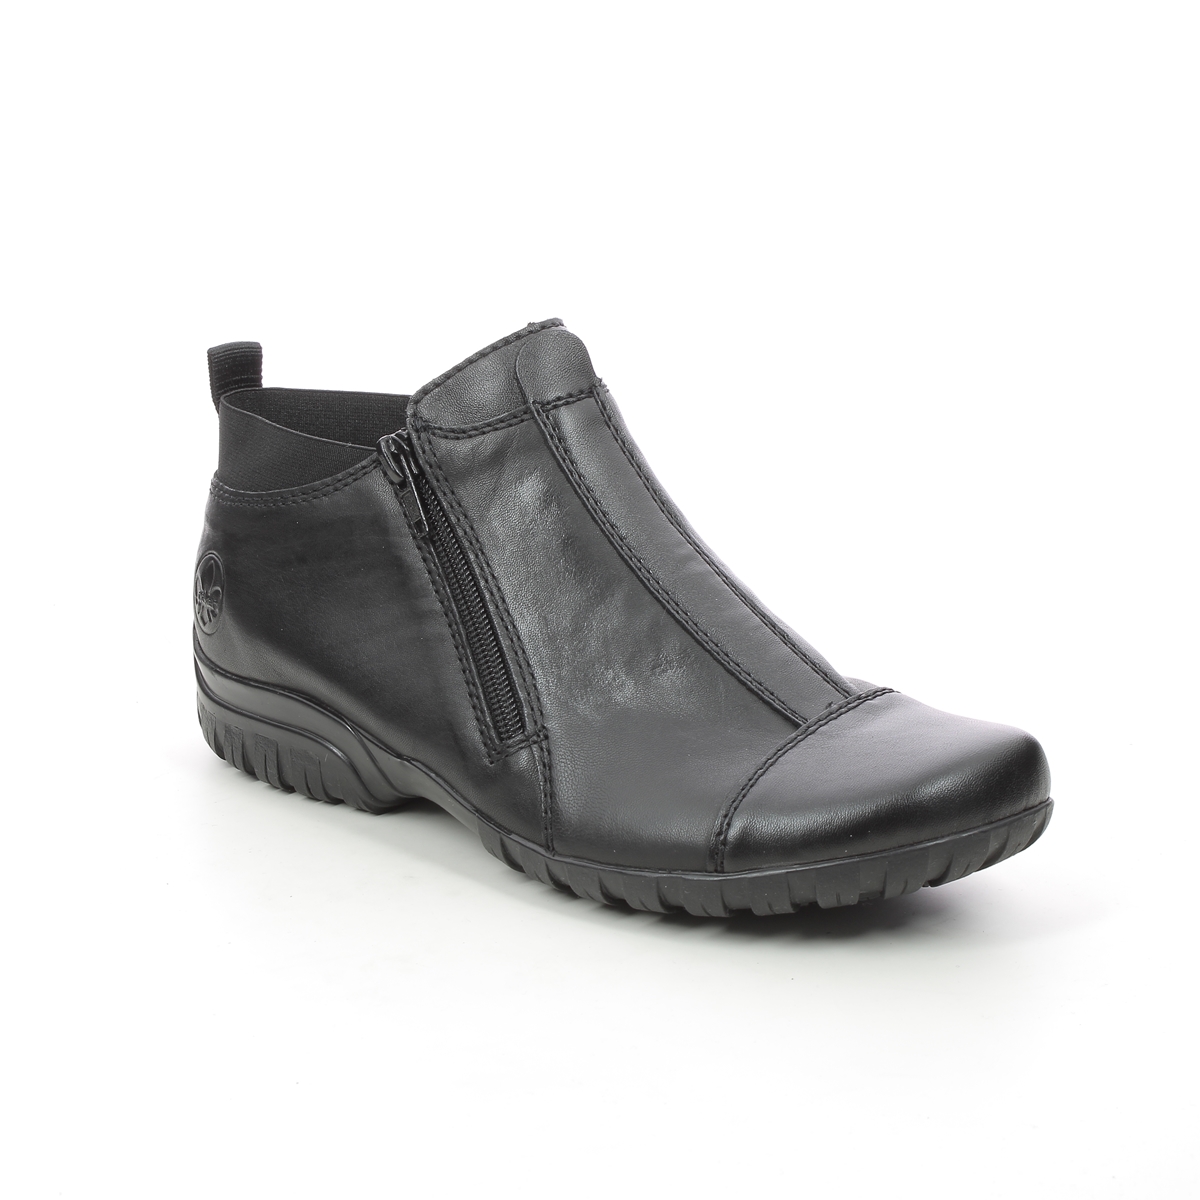 Rieker L4653-00 Black leather Womens Ankle Boots